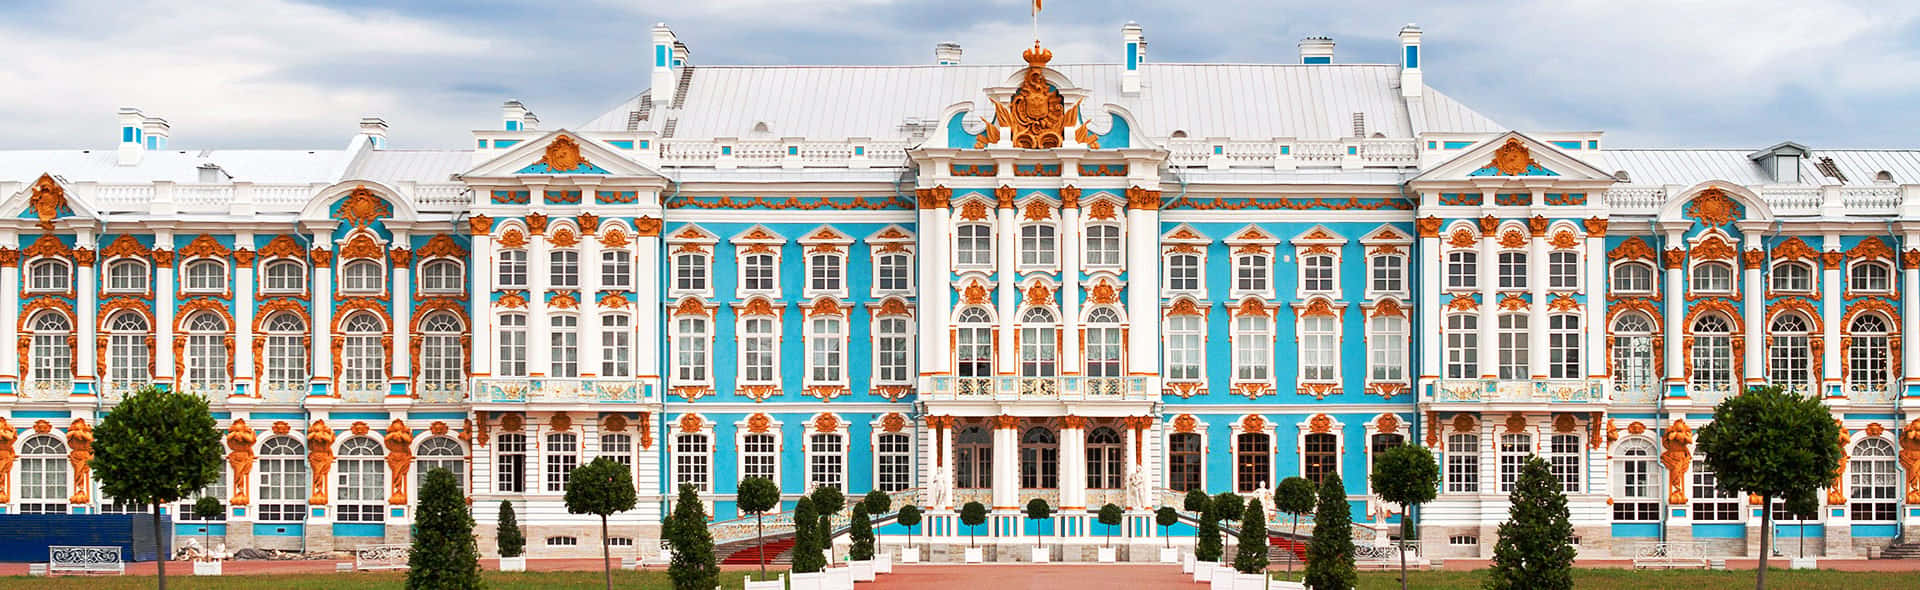 Catherine Palace Architecture Wallpaper